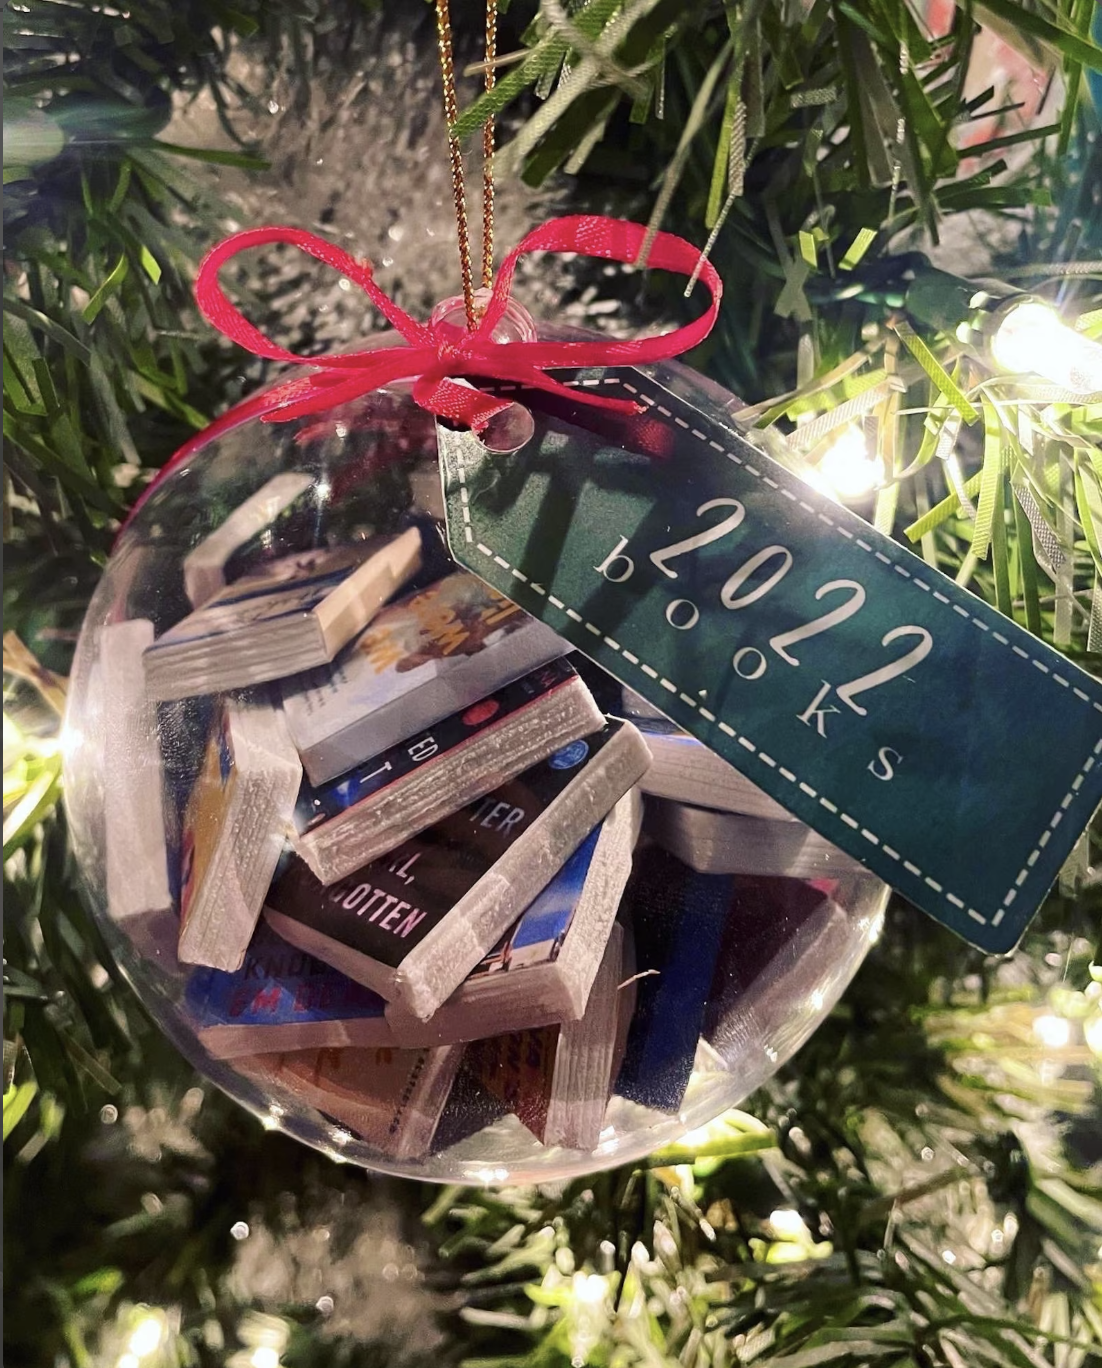 An ornament full of small books